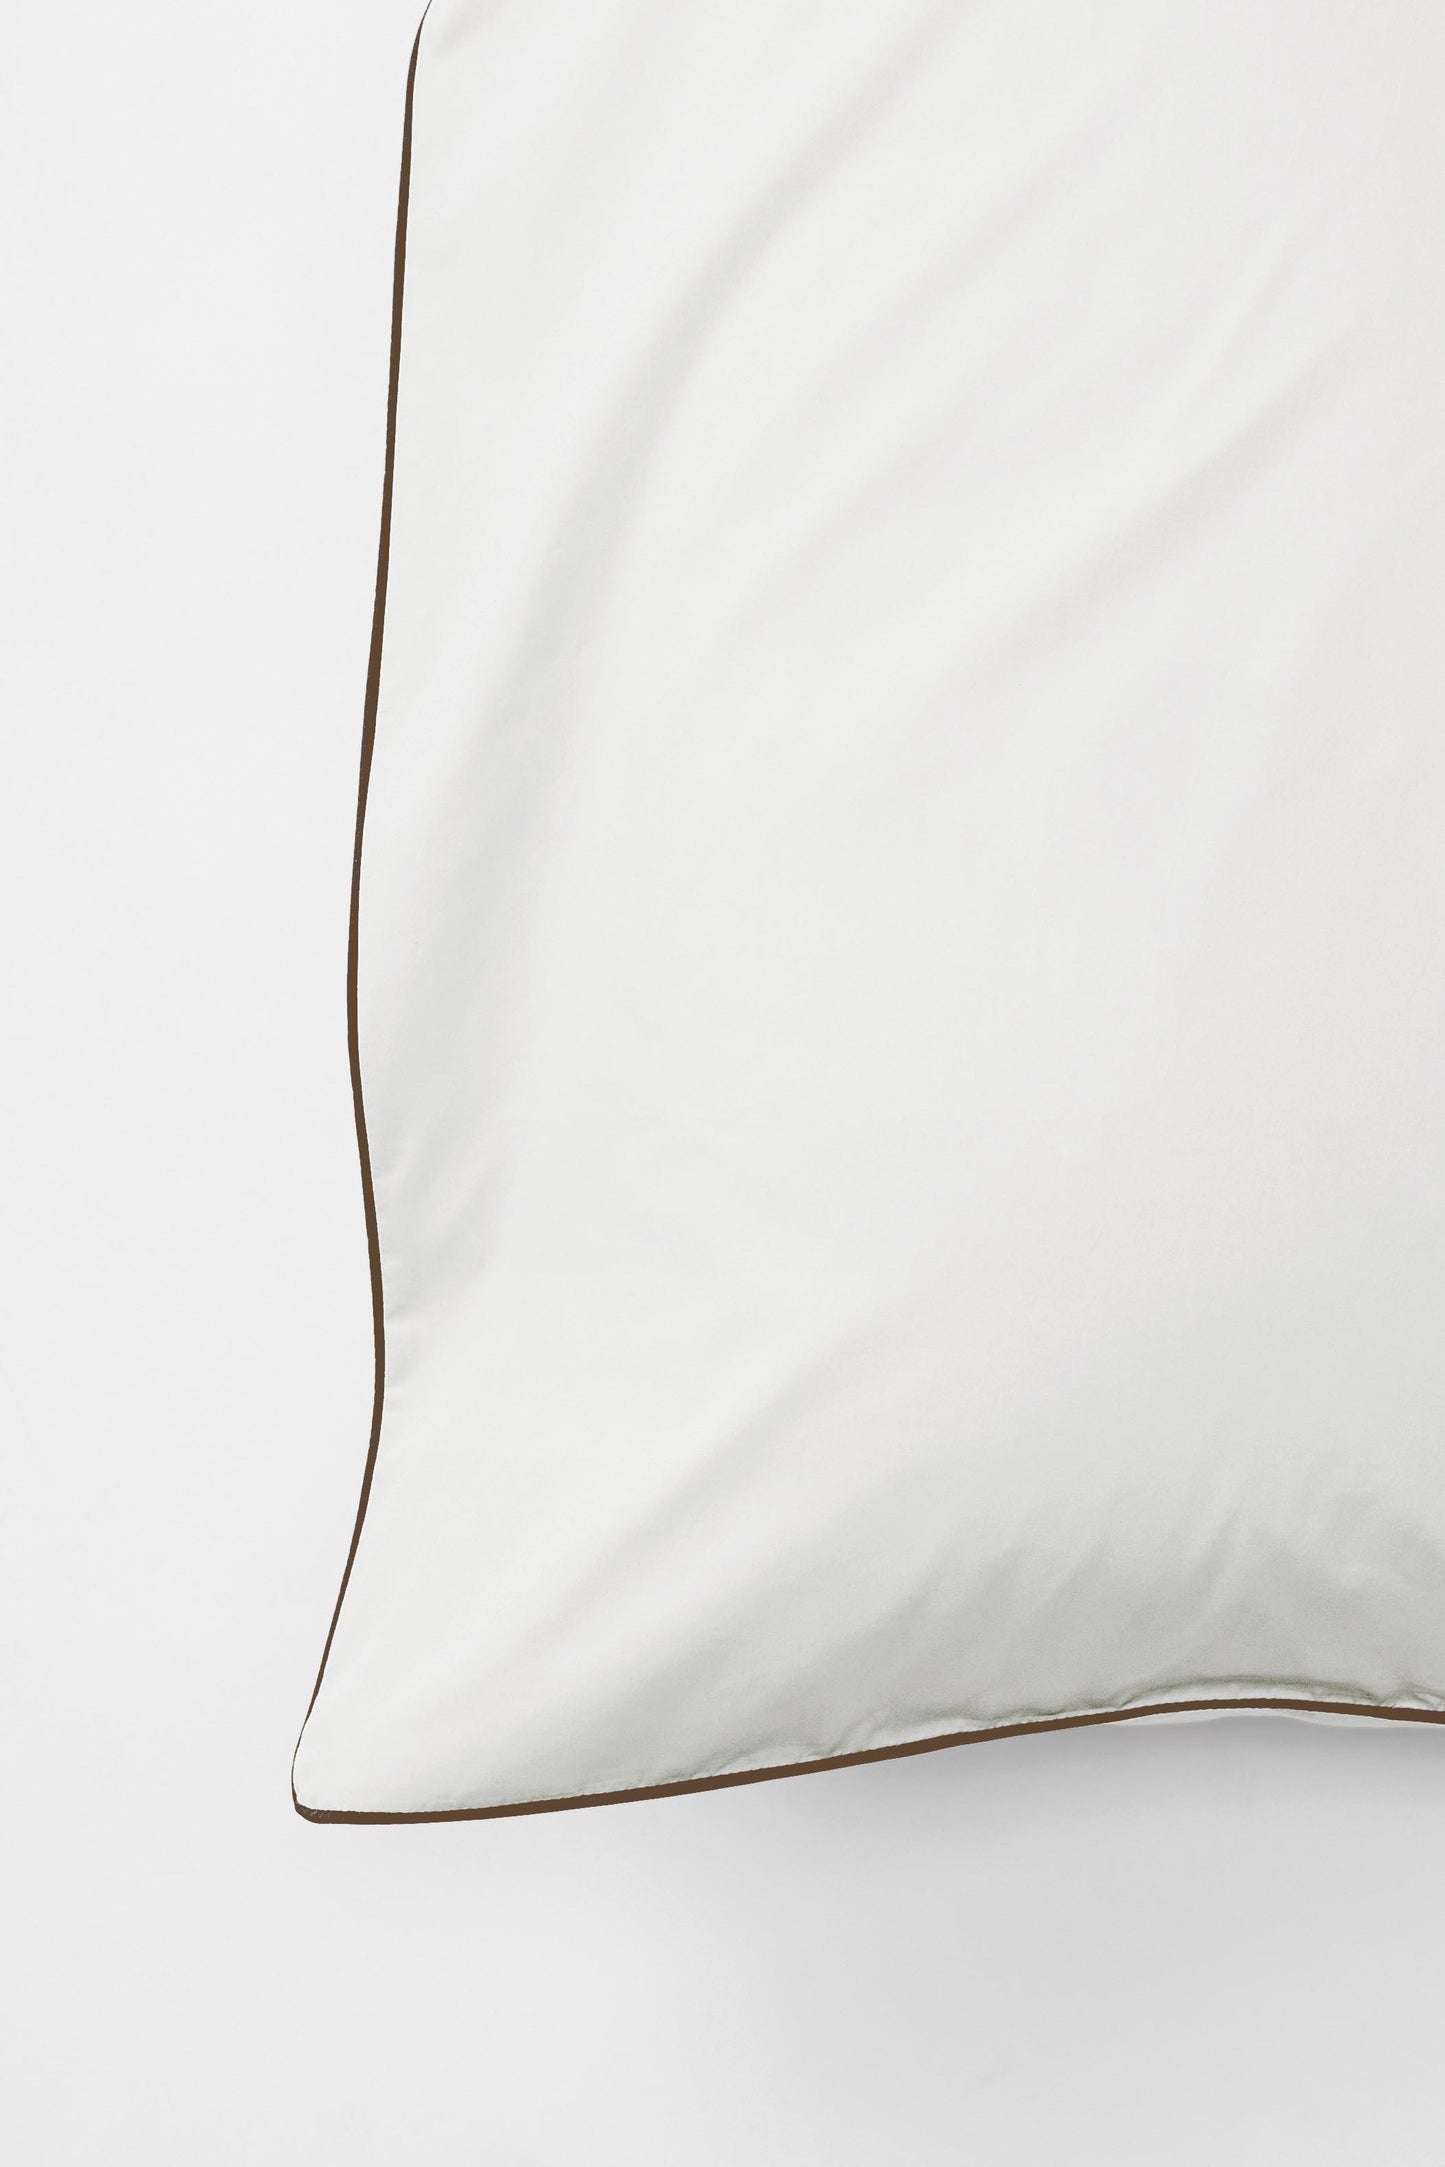 Duvet Cover in Contrast Edge, Prism with Carob